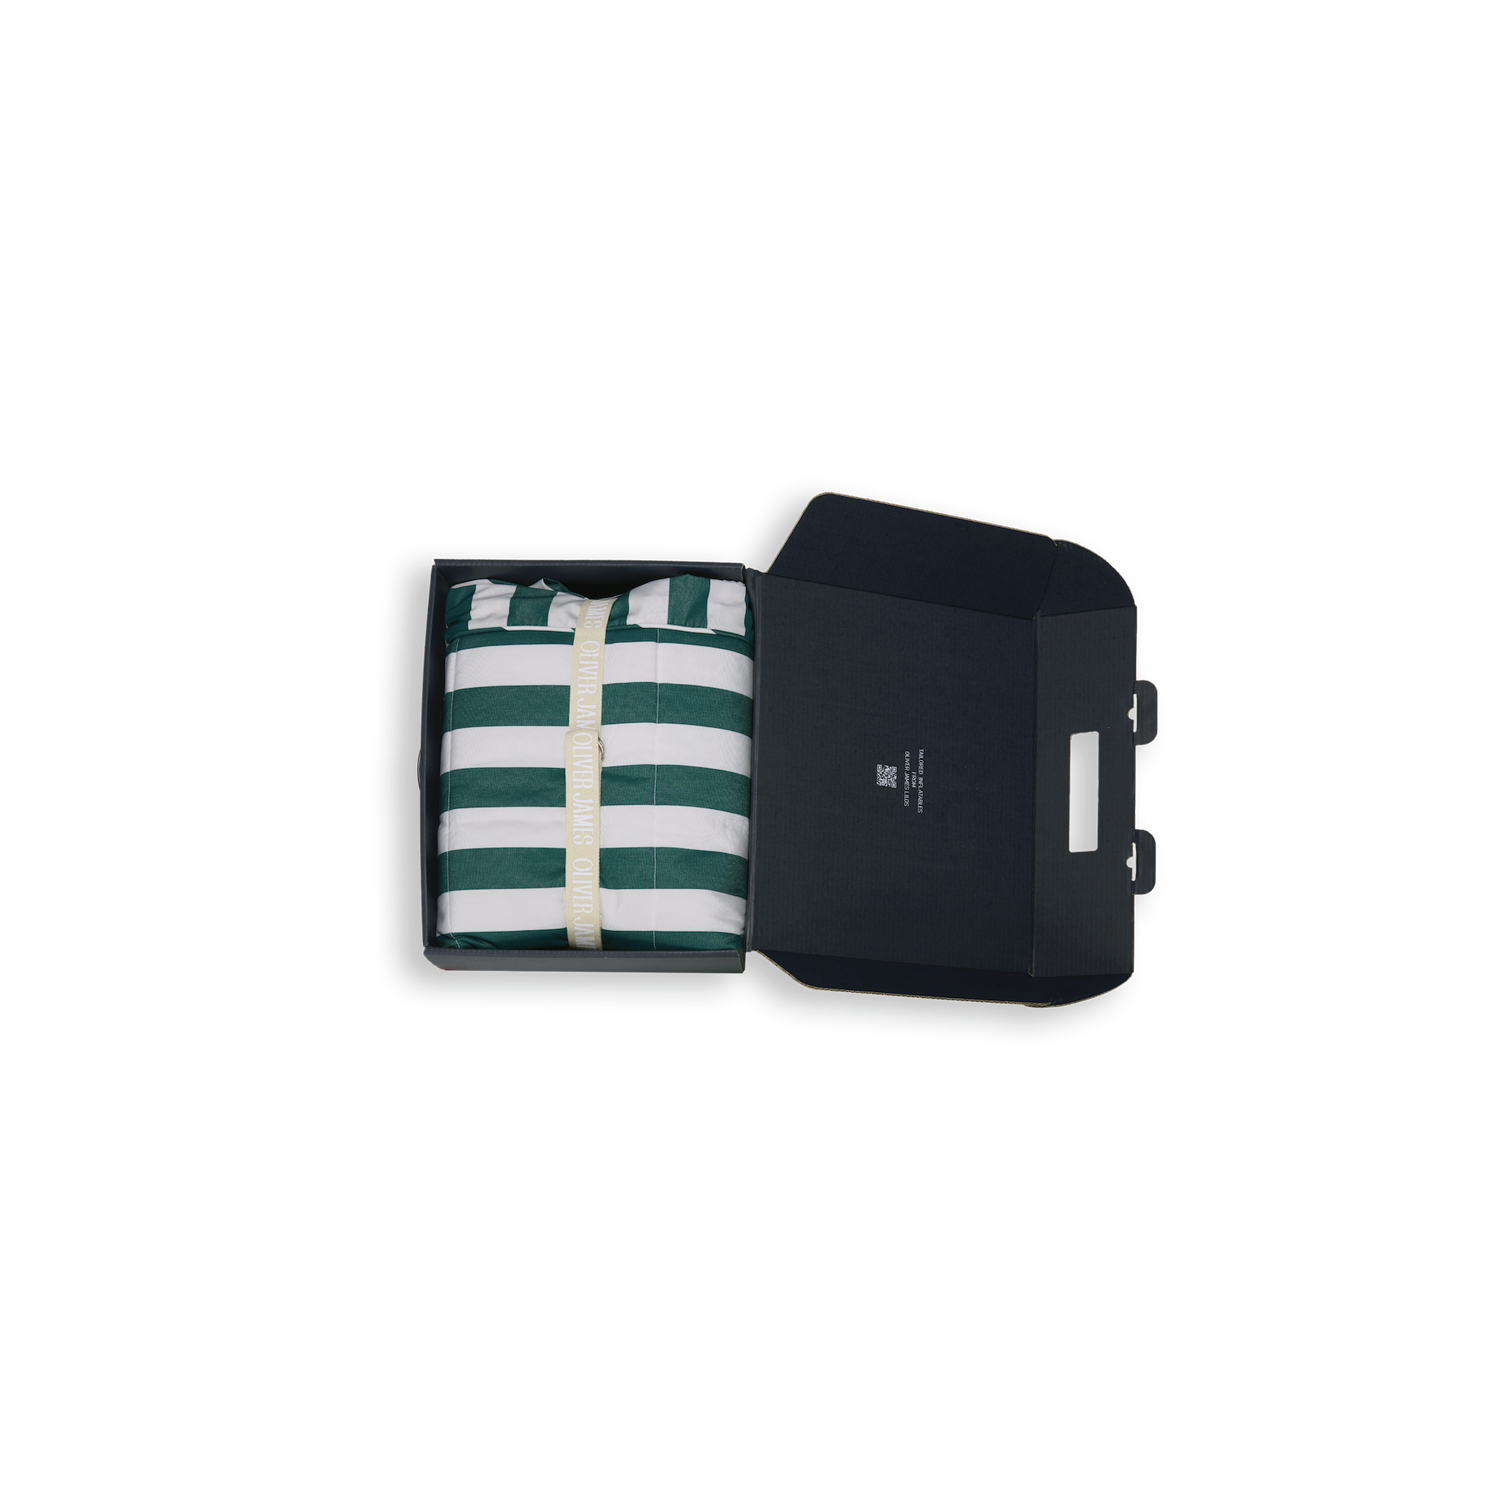 A single green and white stripe inflatable luxury pool float lounger cover folded in black box box with a belt, card and pump.